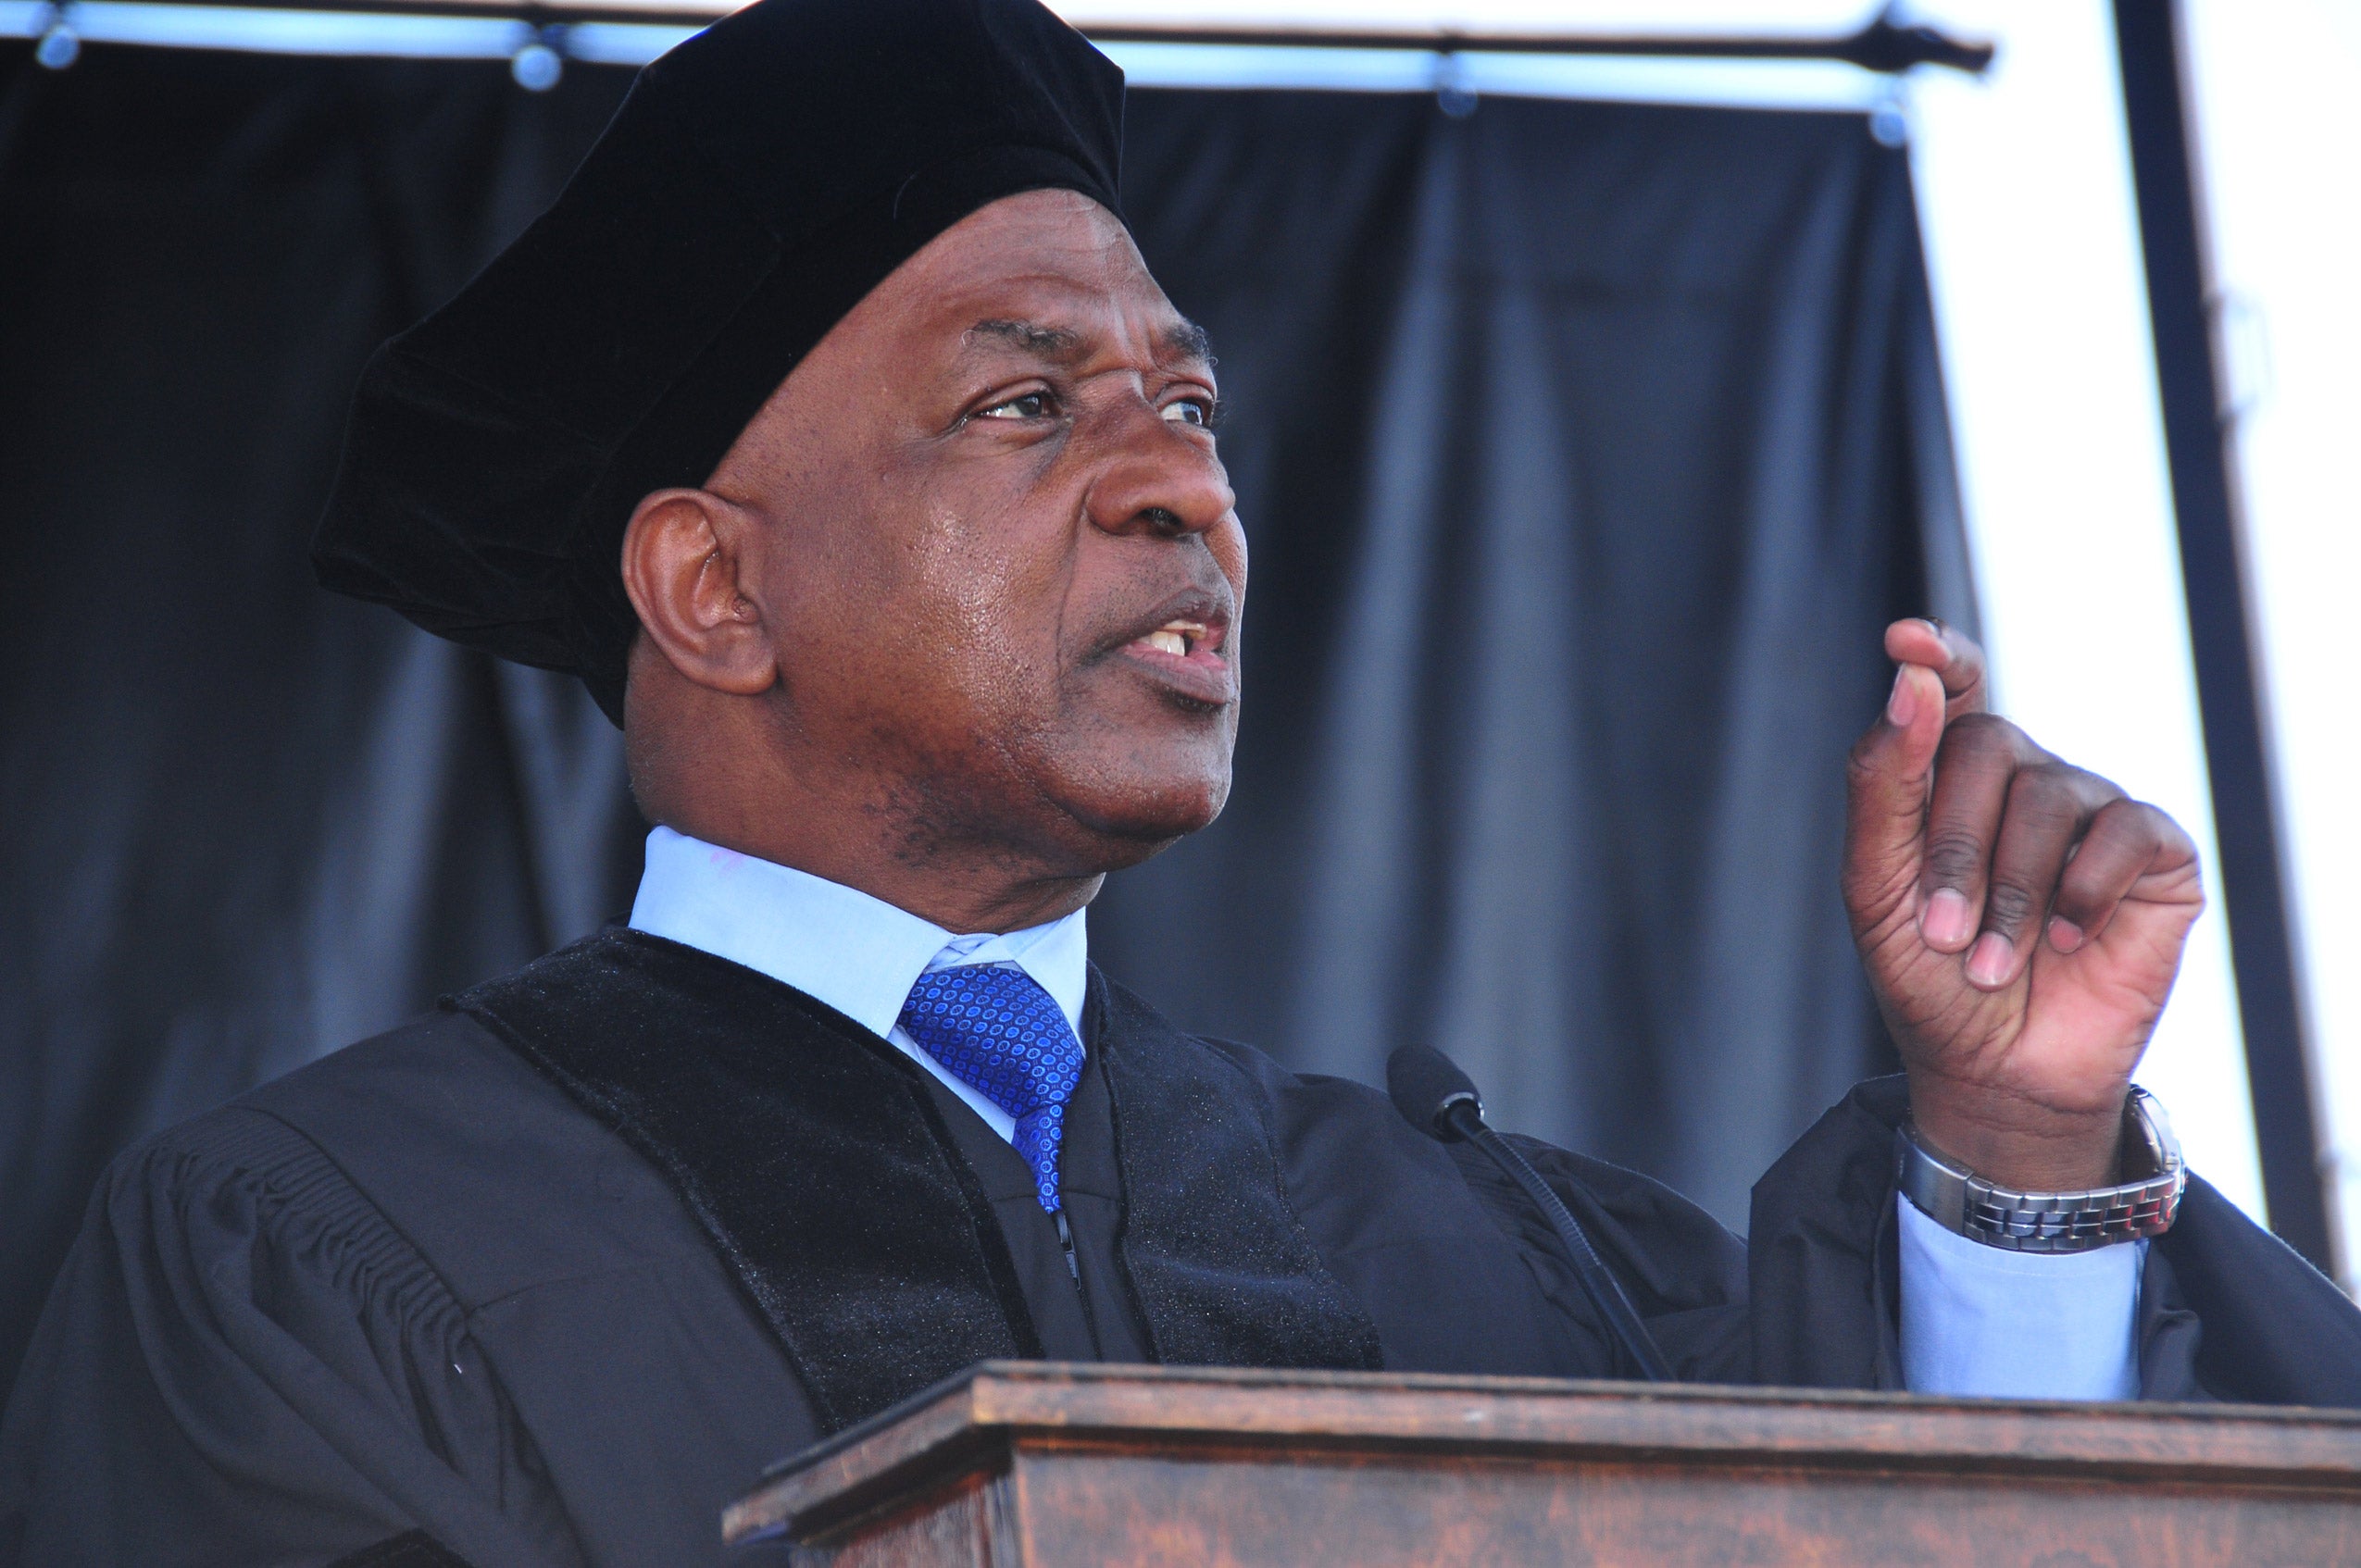 Professor Charles Ogletree speaking in commencement robes and hat